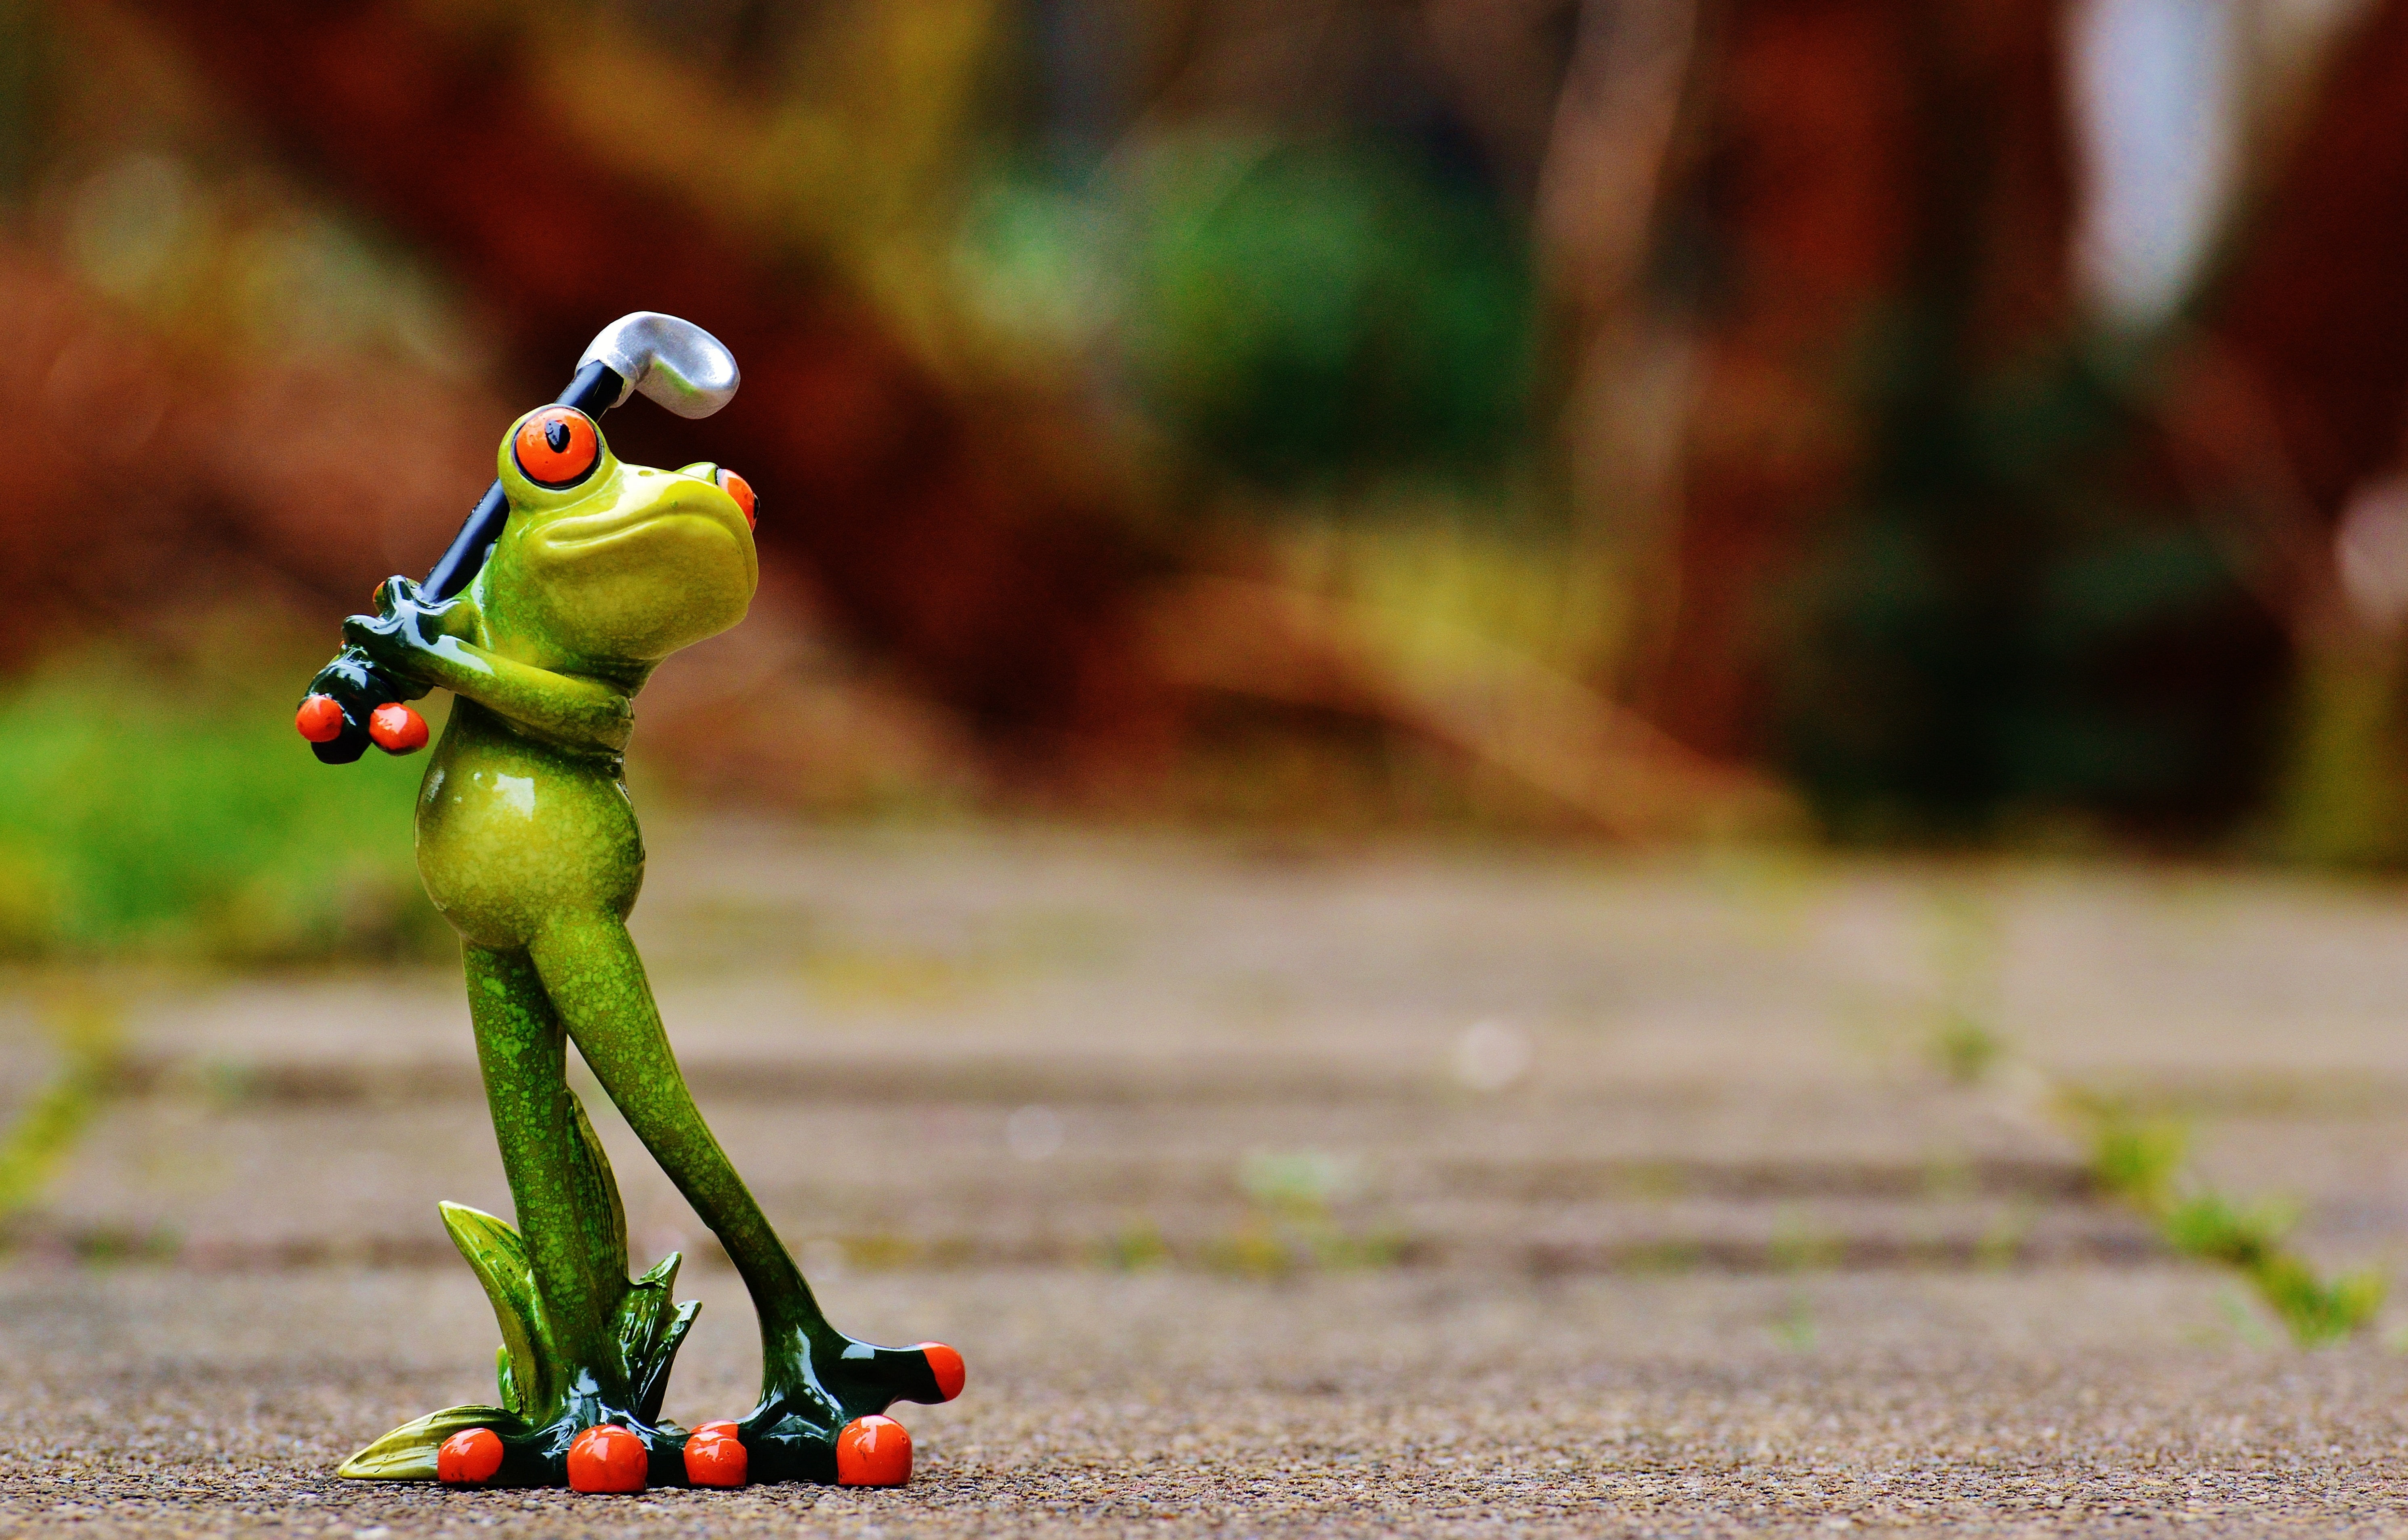 Fig, Golf, Frog, Sweet, Funny, Fun, Cute, toy, no people